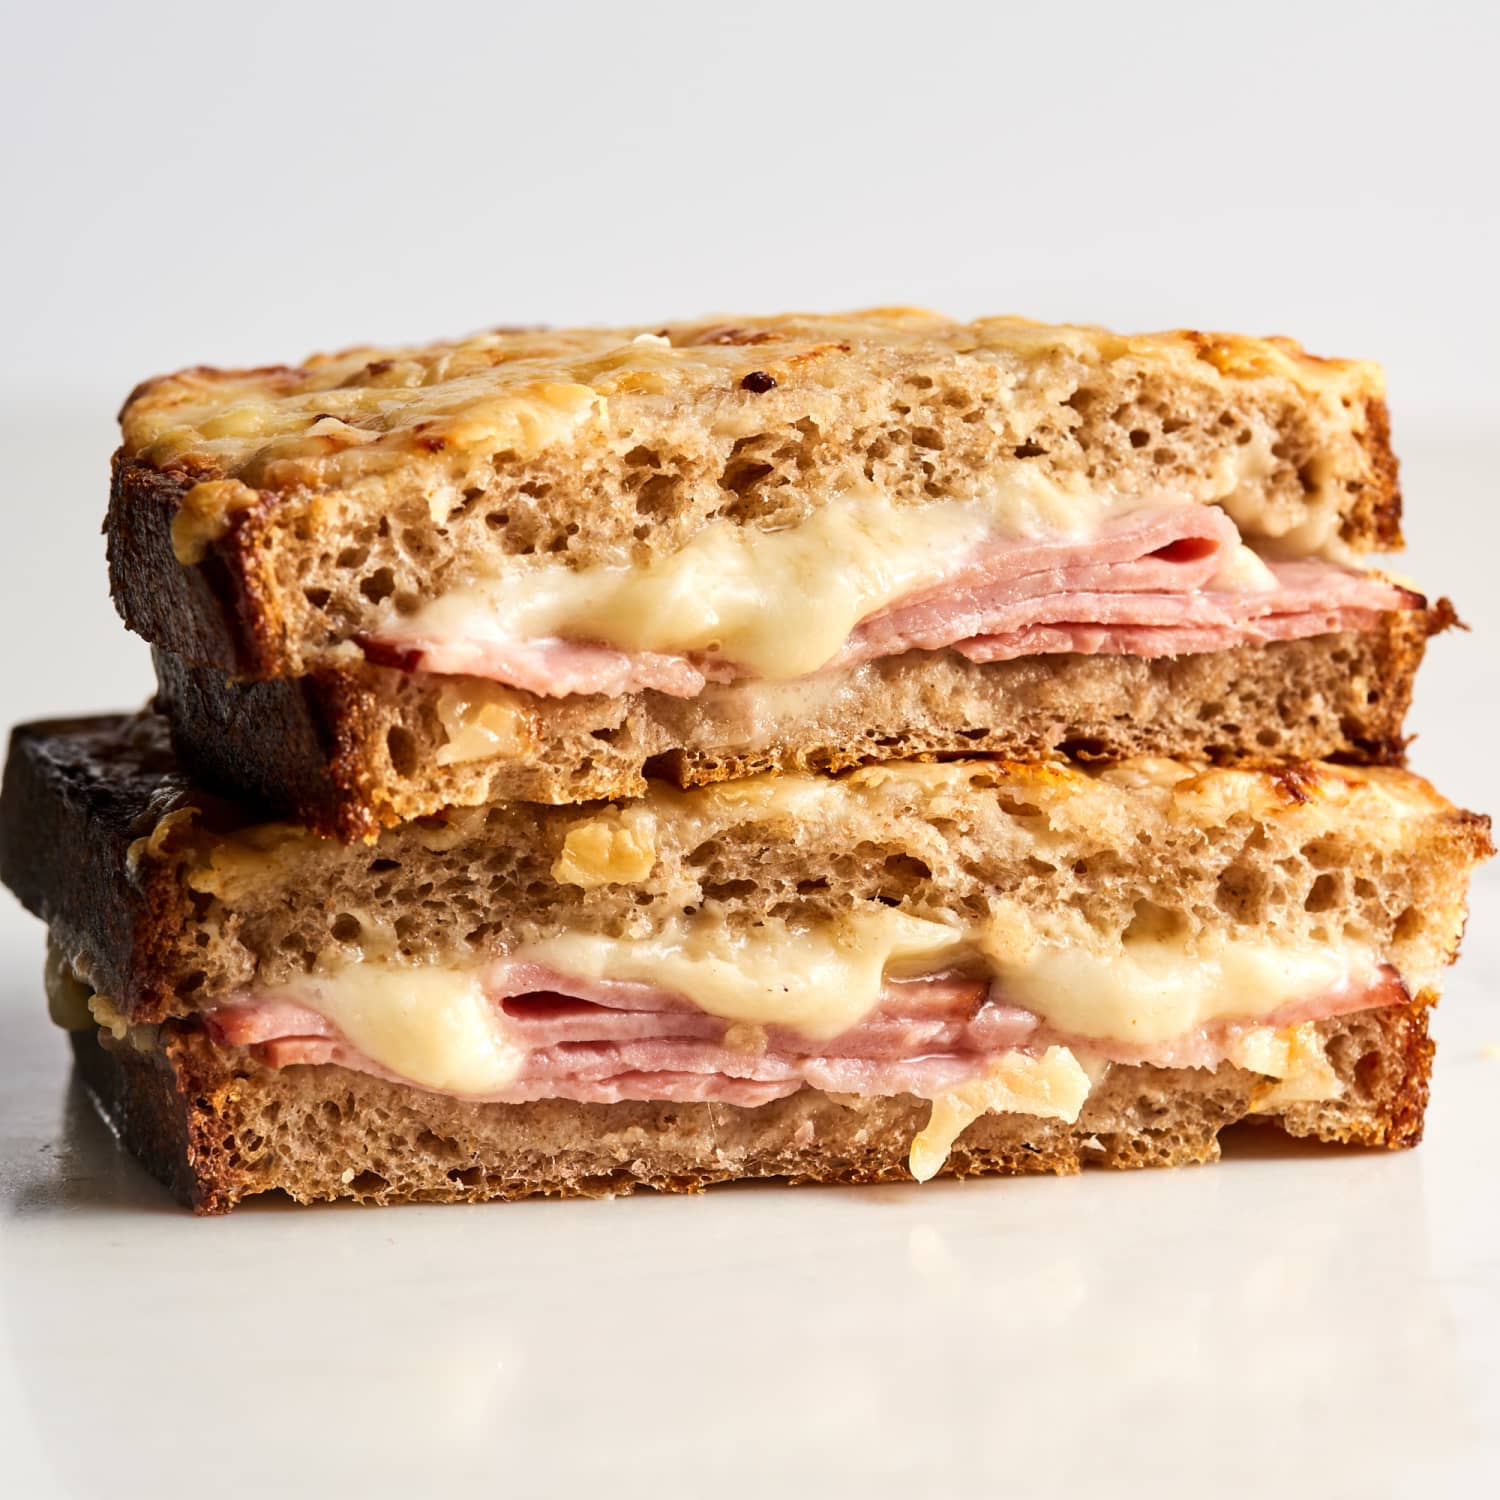 Snack collection, Croque-monsieur